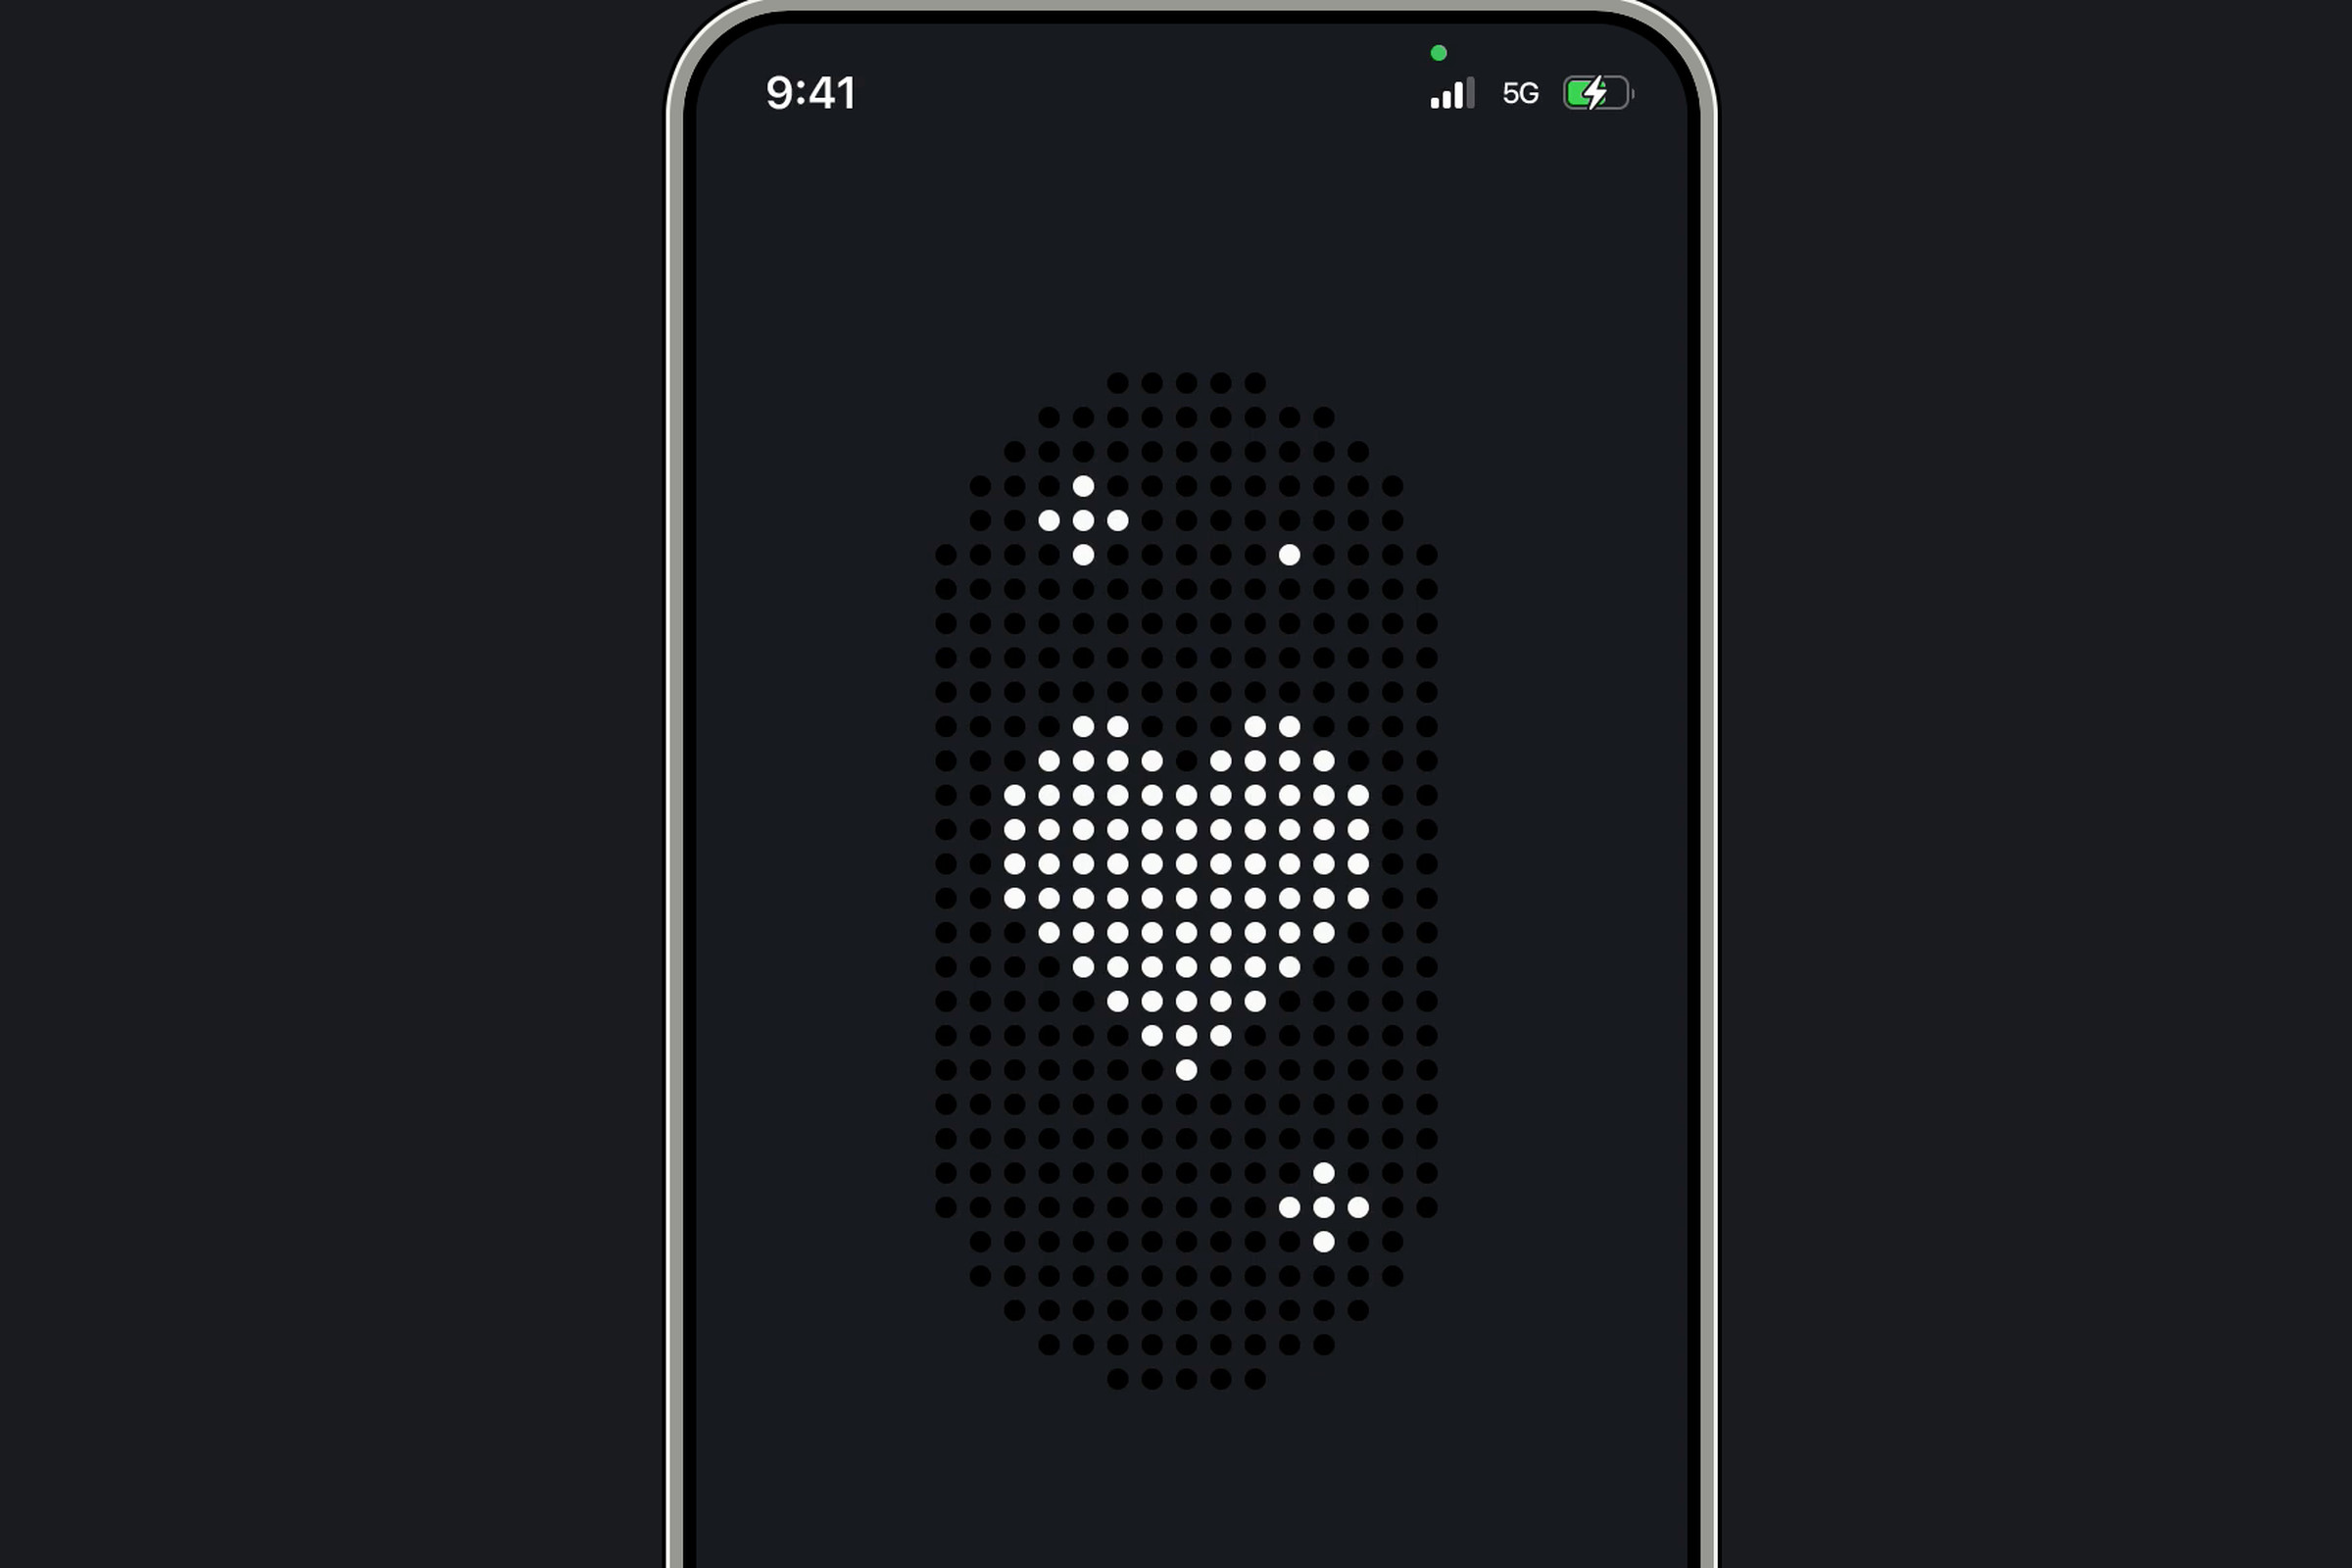 An illustration showing an app with a black background showing hearts on a black display that mimics the matrix display used on VanMoof e-bikes.